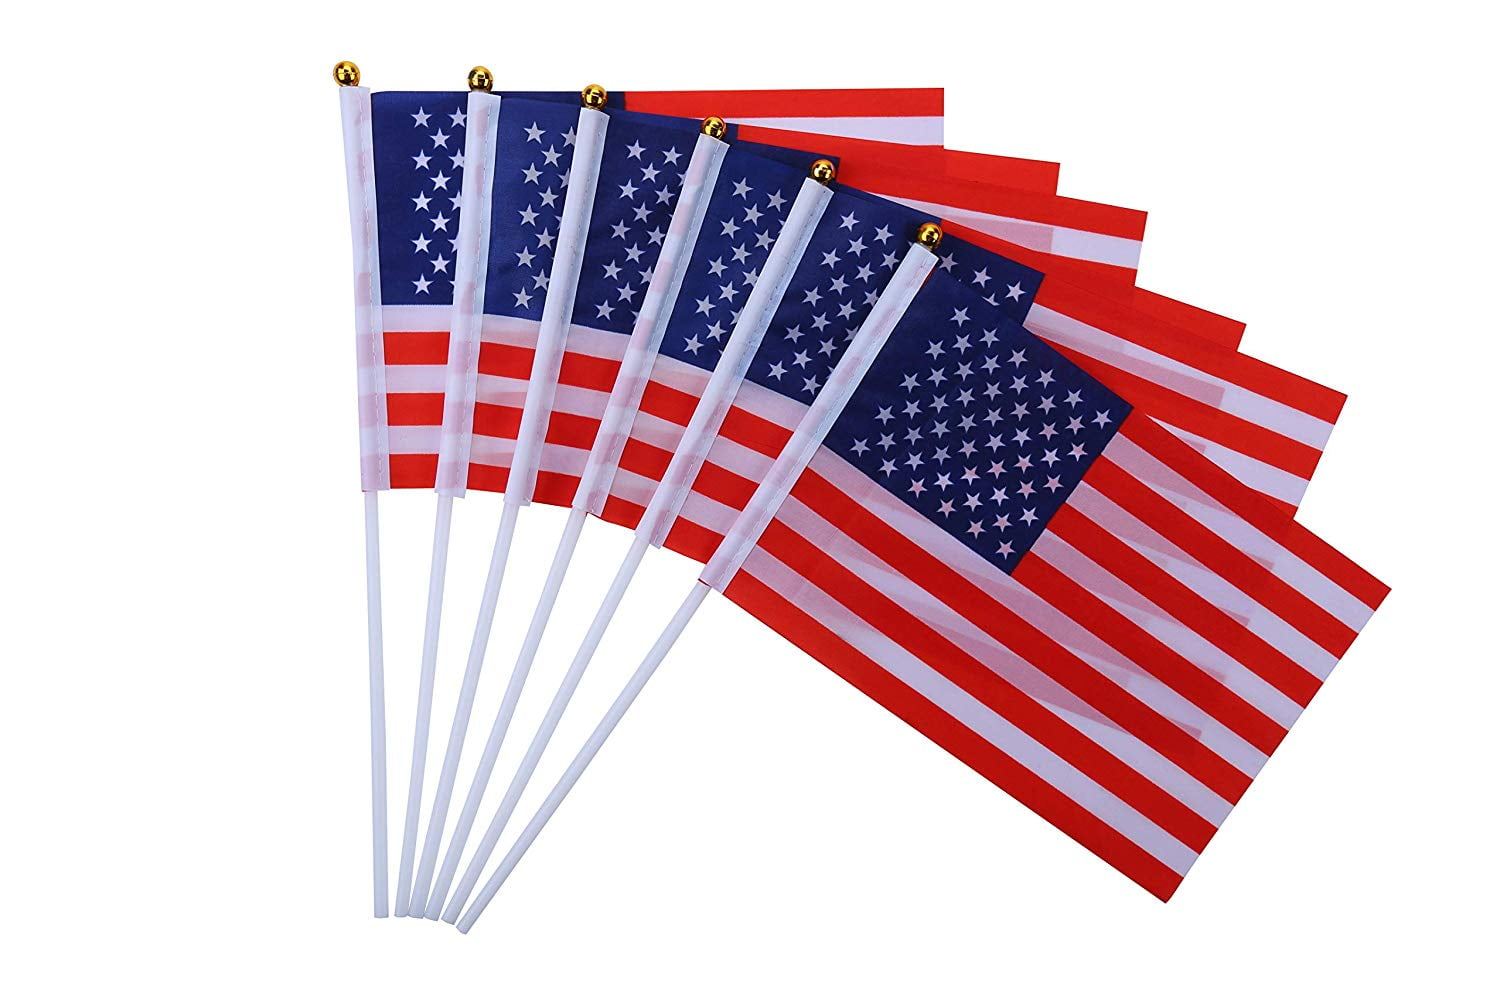 USA STARS AND STRIPES AMERICA MINI POLYESTER US STATE FLAG BANNER 3 X 5 INCHES 